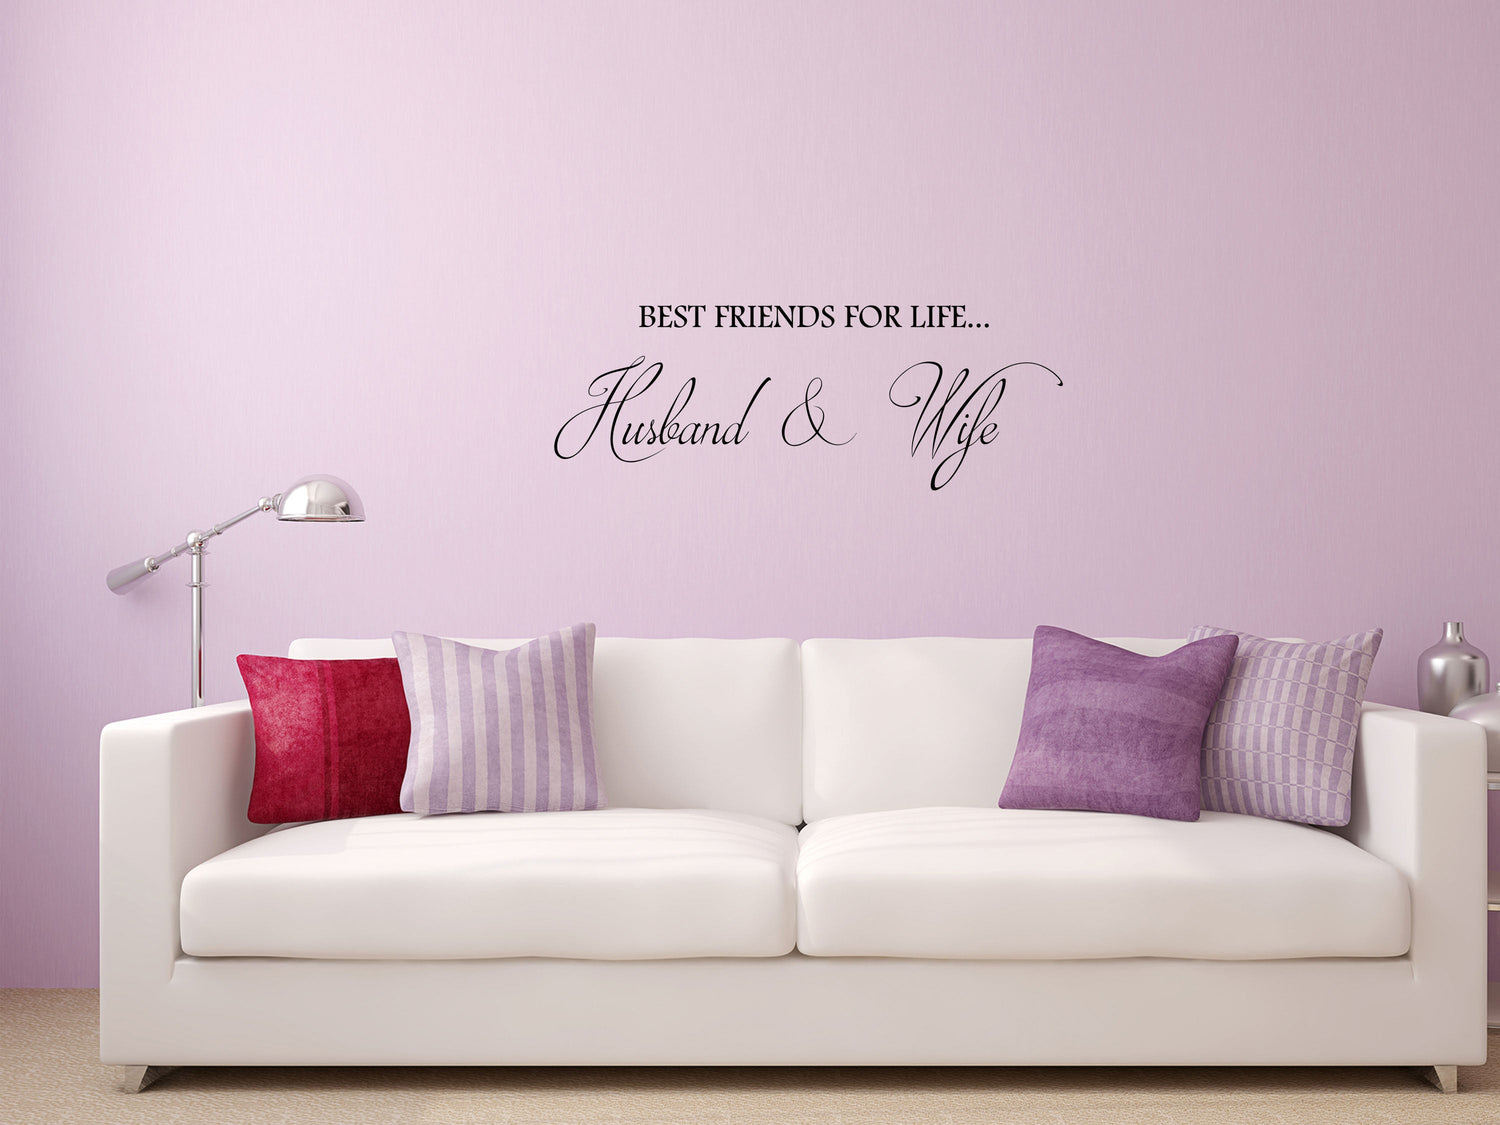 Best Friends For Life...Husband & Wife Marriage Sticker Vinyl Wall Decal Inspirational Wall Signs 